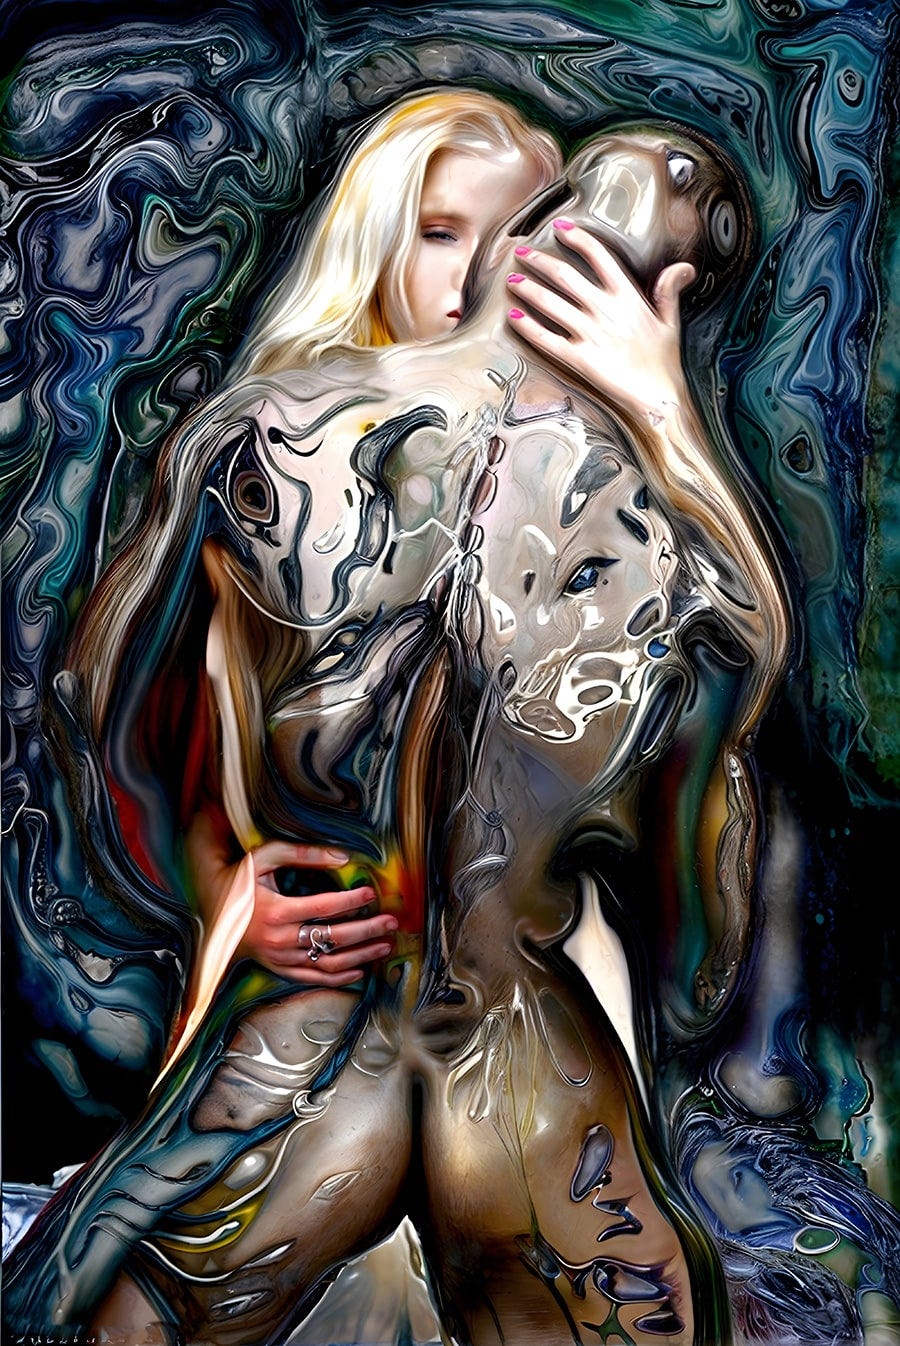 A blonde woman hugging a naked black man — erotic art image for a sex story by Samarel Eros